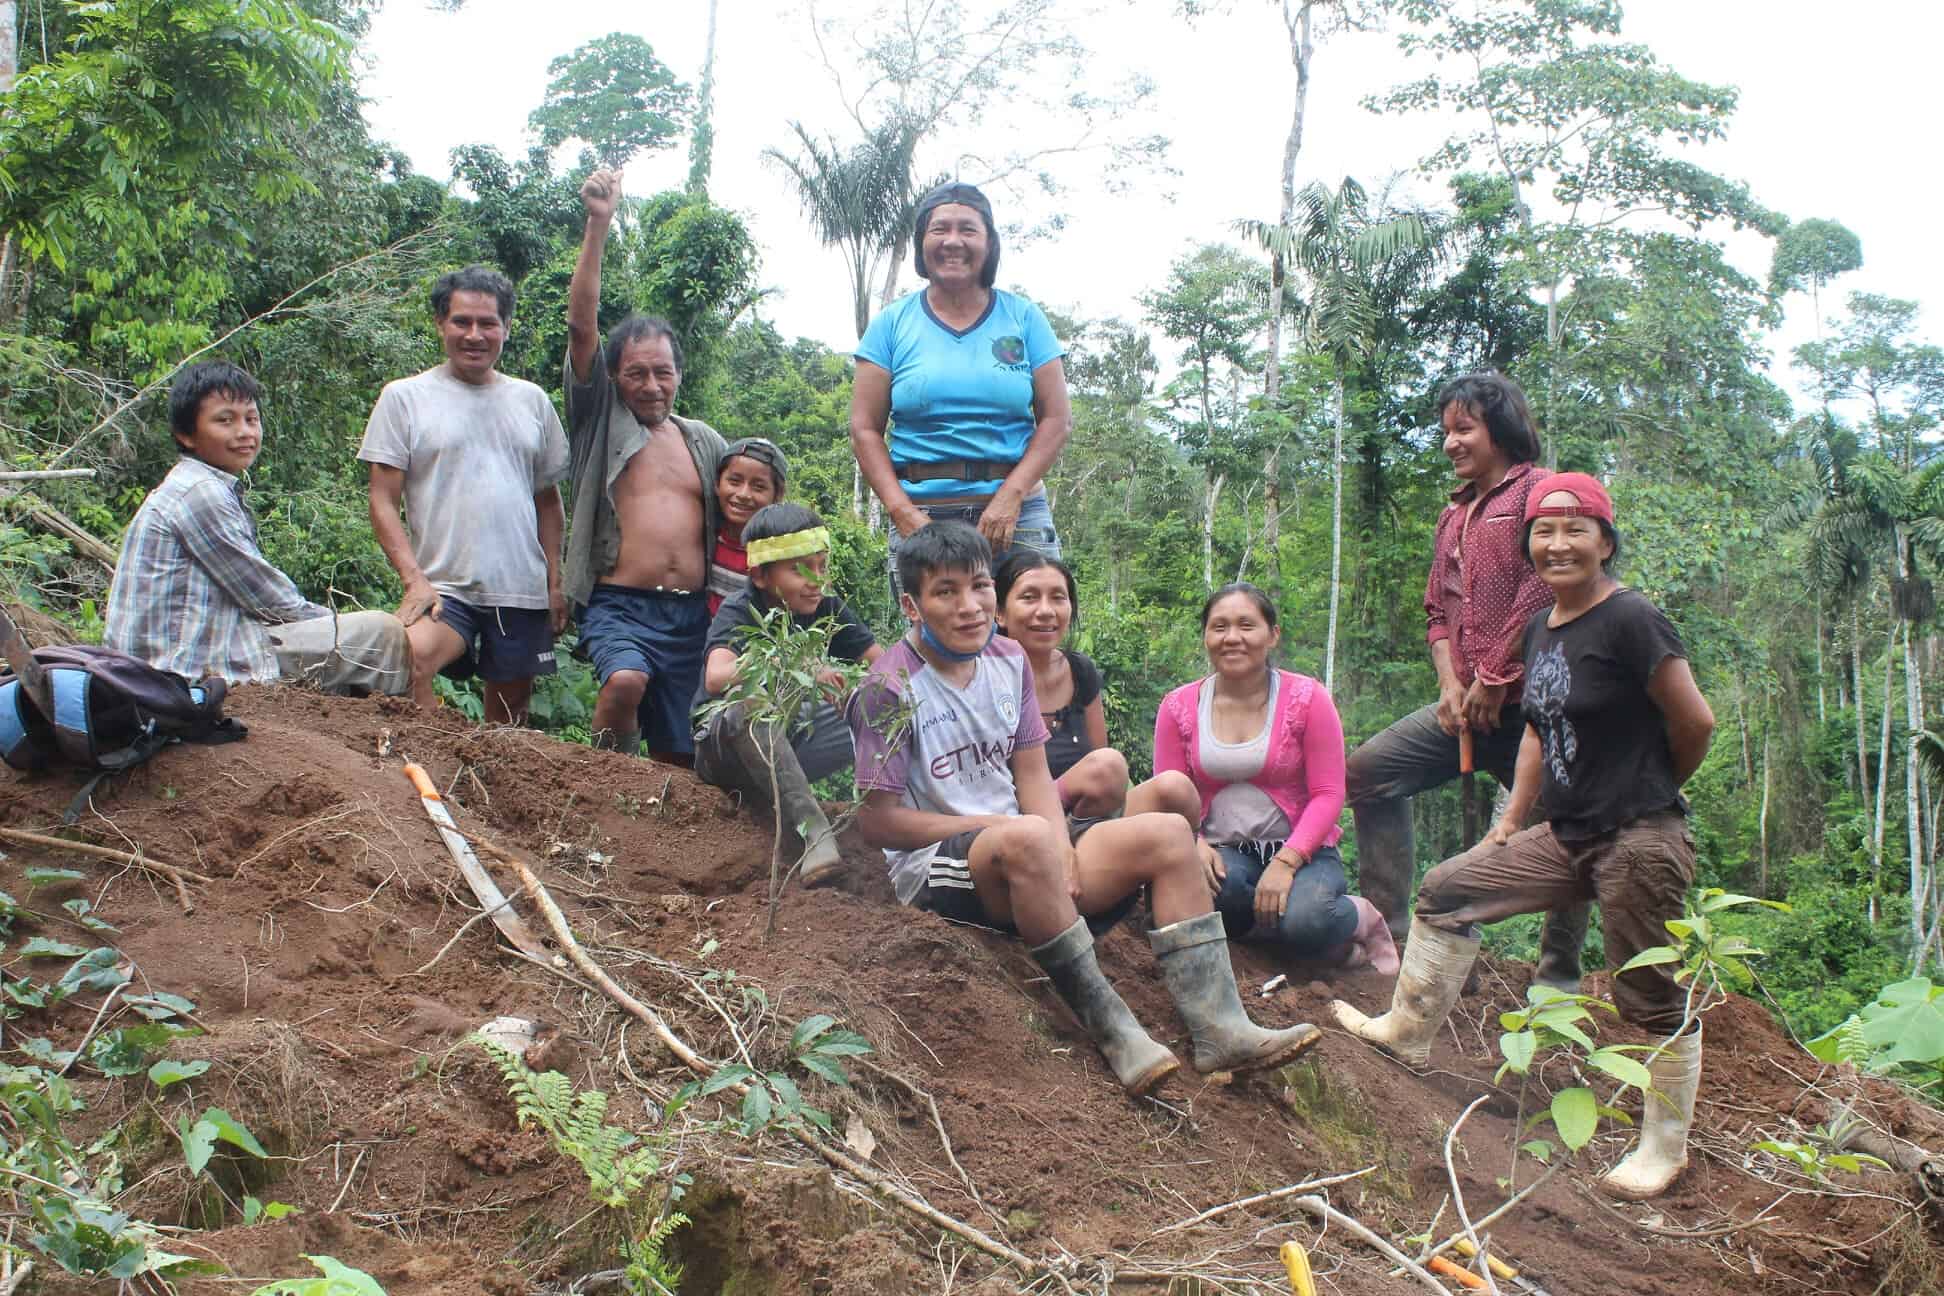 A group of Indigenous women and their families sit together on a small hill in the rainforest.